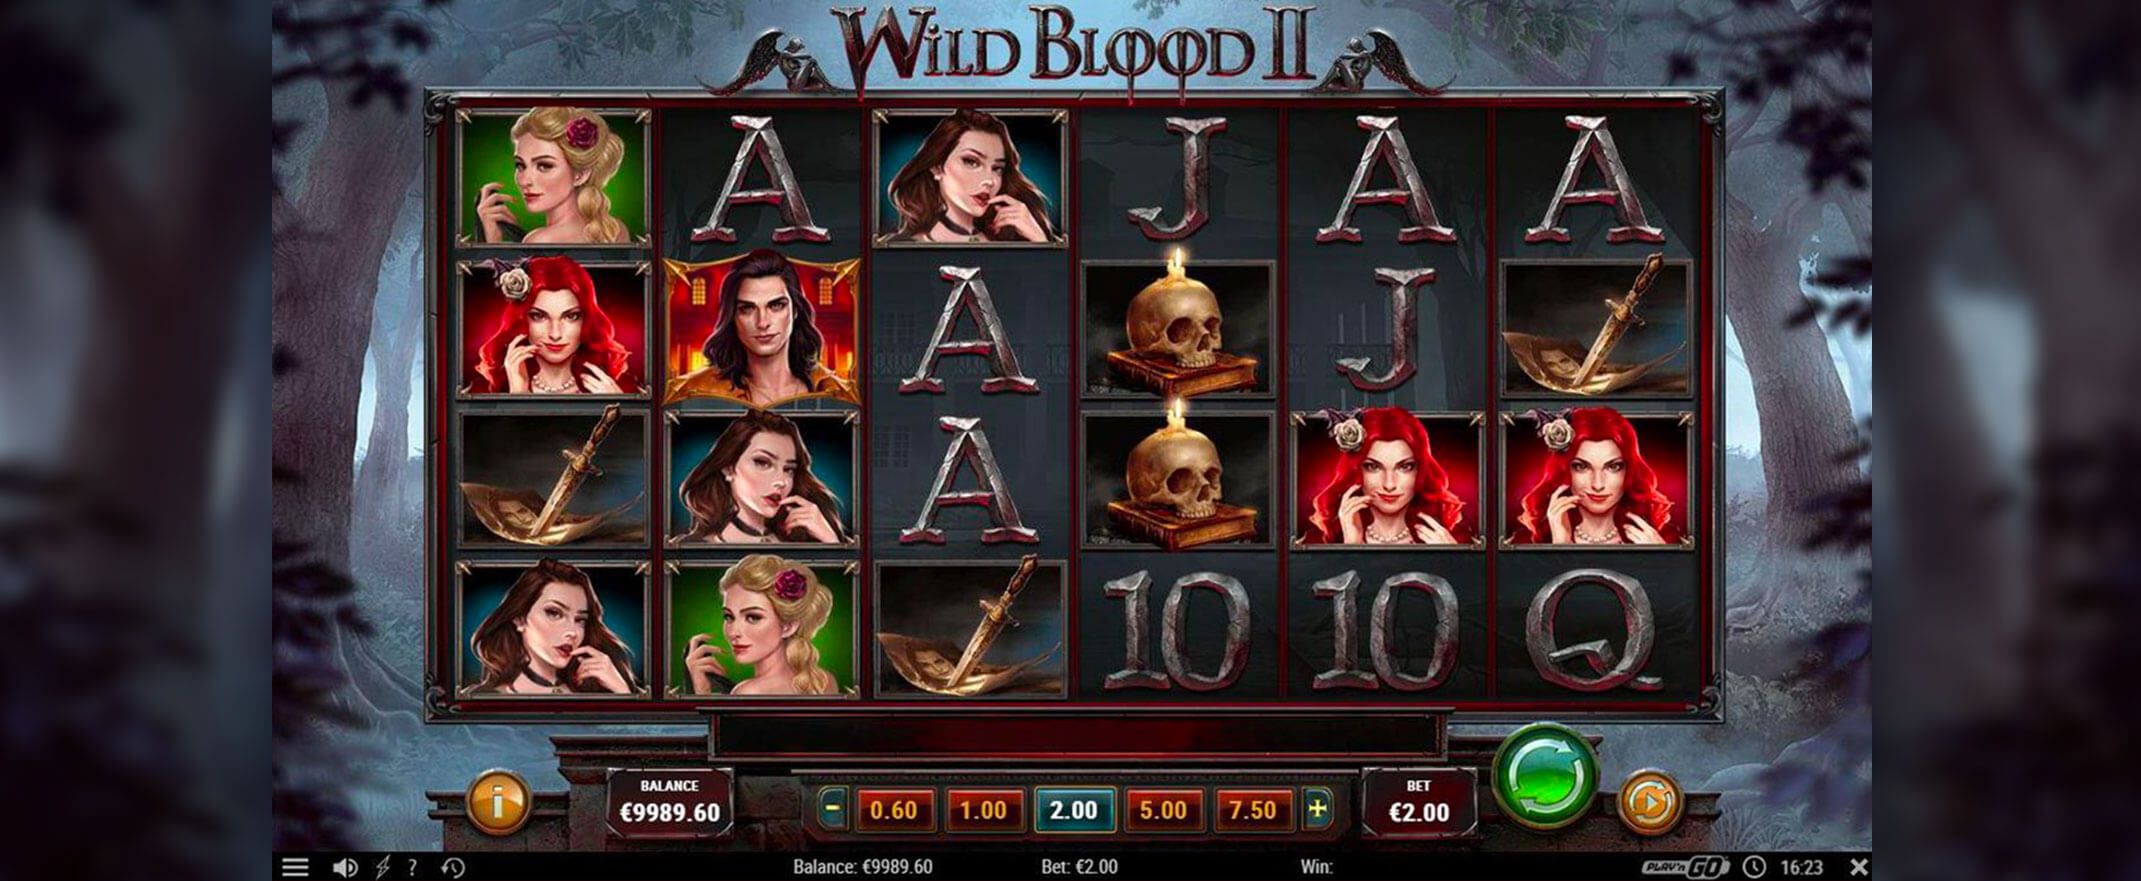 Wild Blood 2 slot by Play'n Go